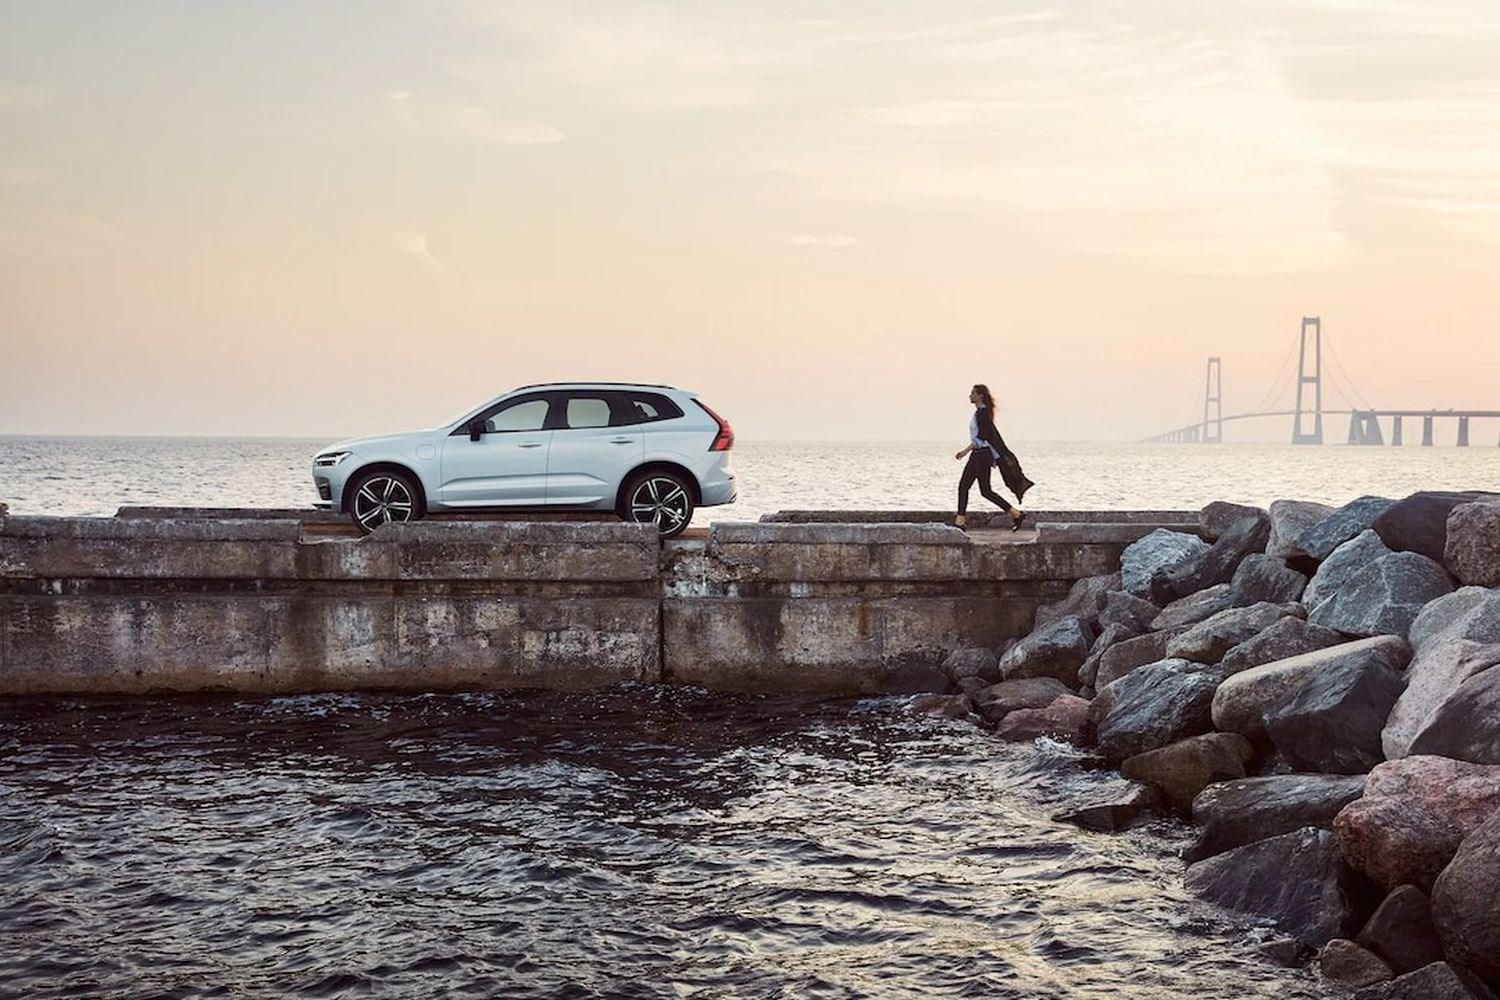 Person walks towards white Volvo XC40 that is parked on pier. River and large bridge are visible in the background.